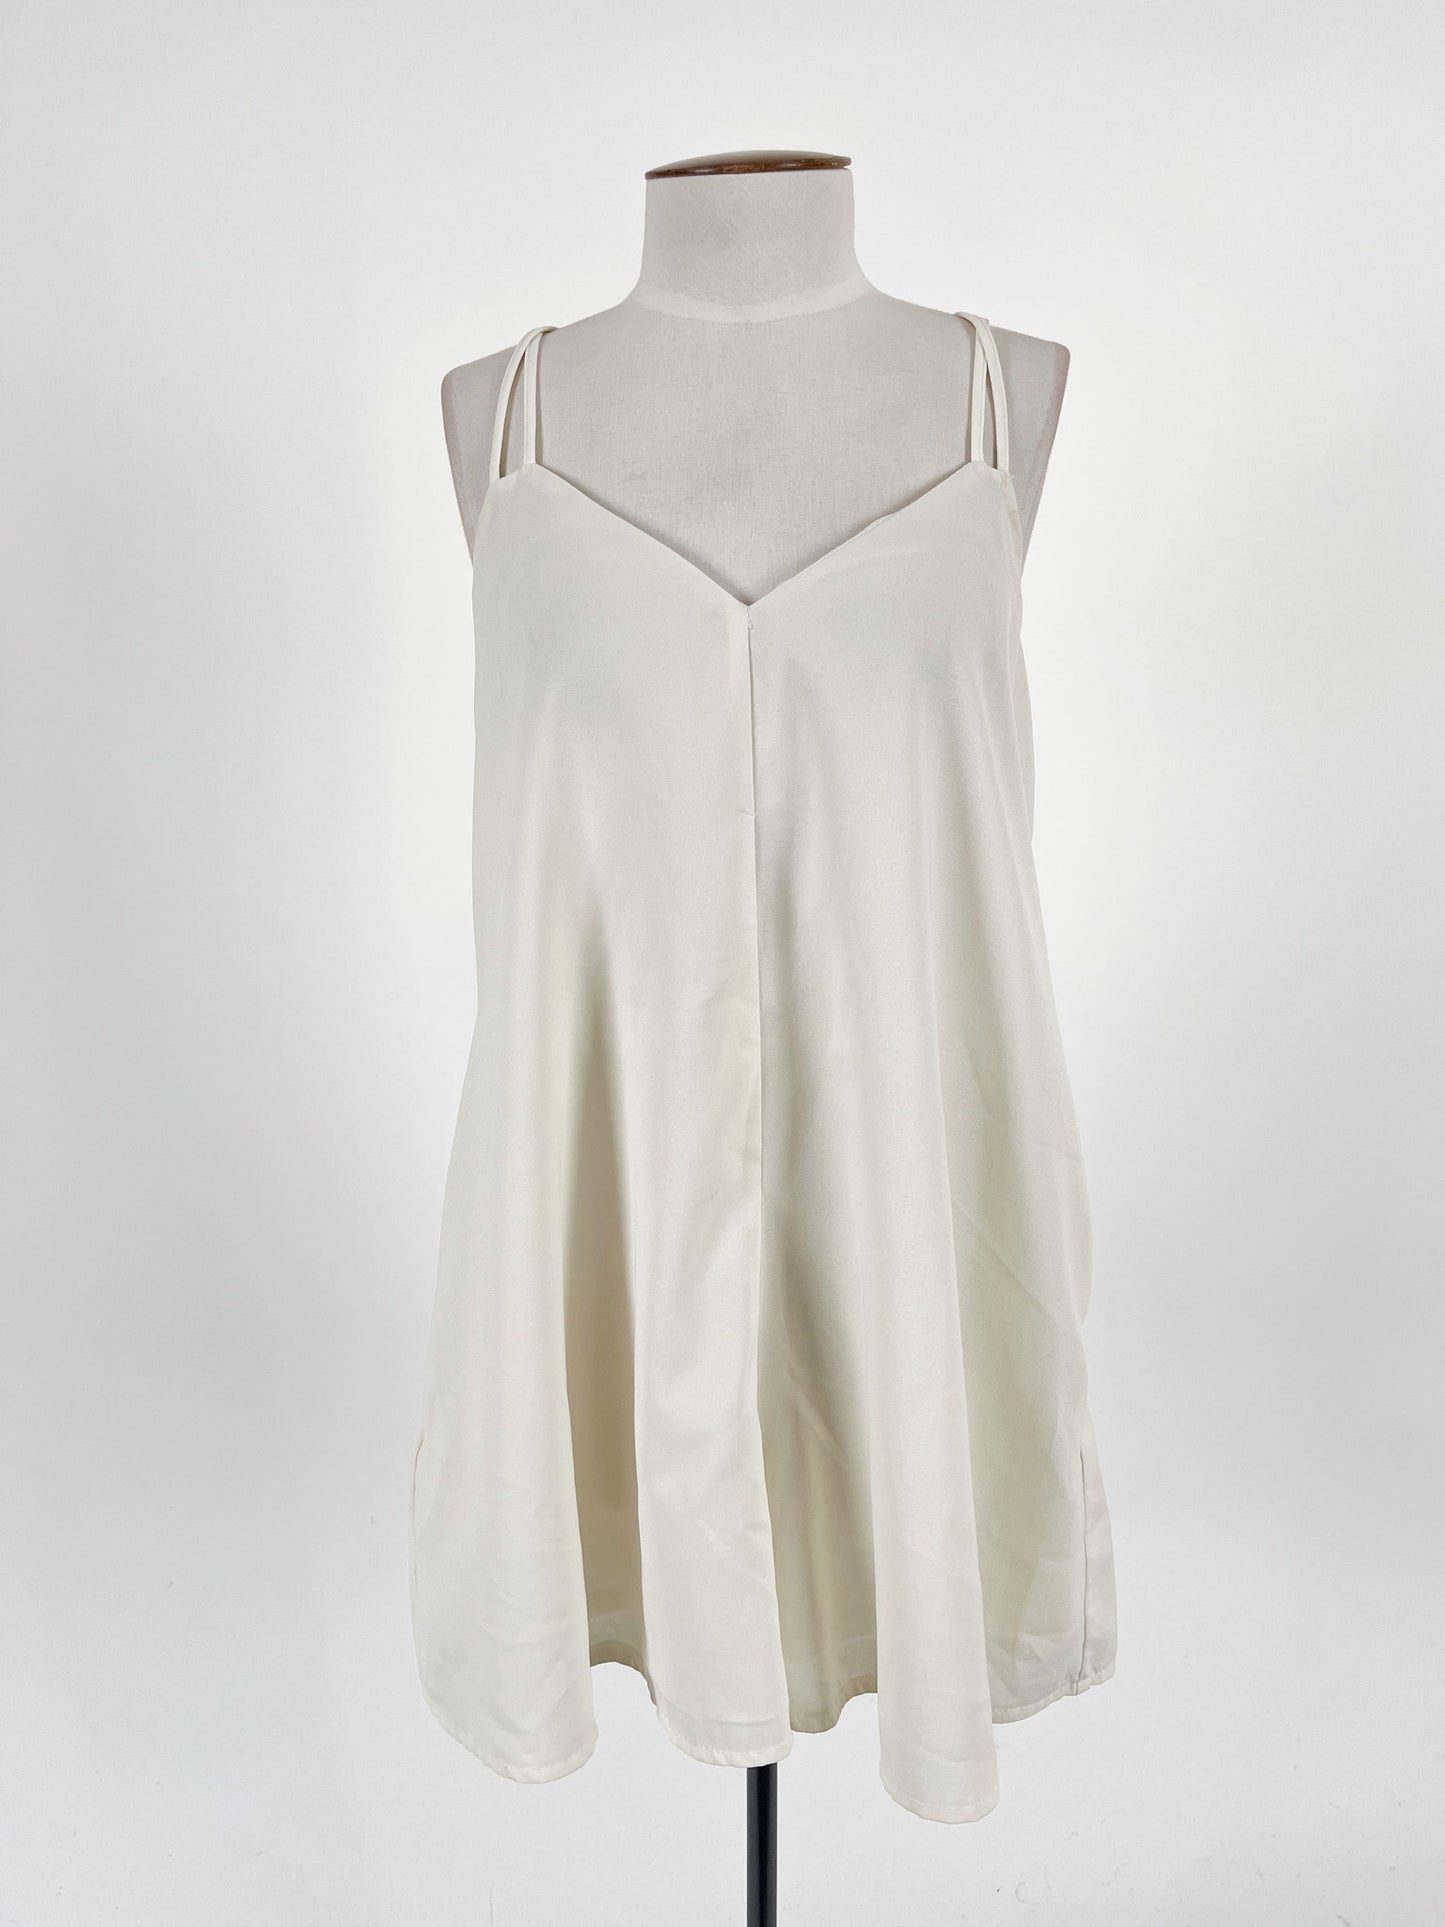 Lippy | Beige Casual/Cocktail Playsuit | Size 8